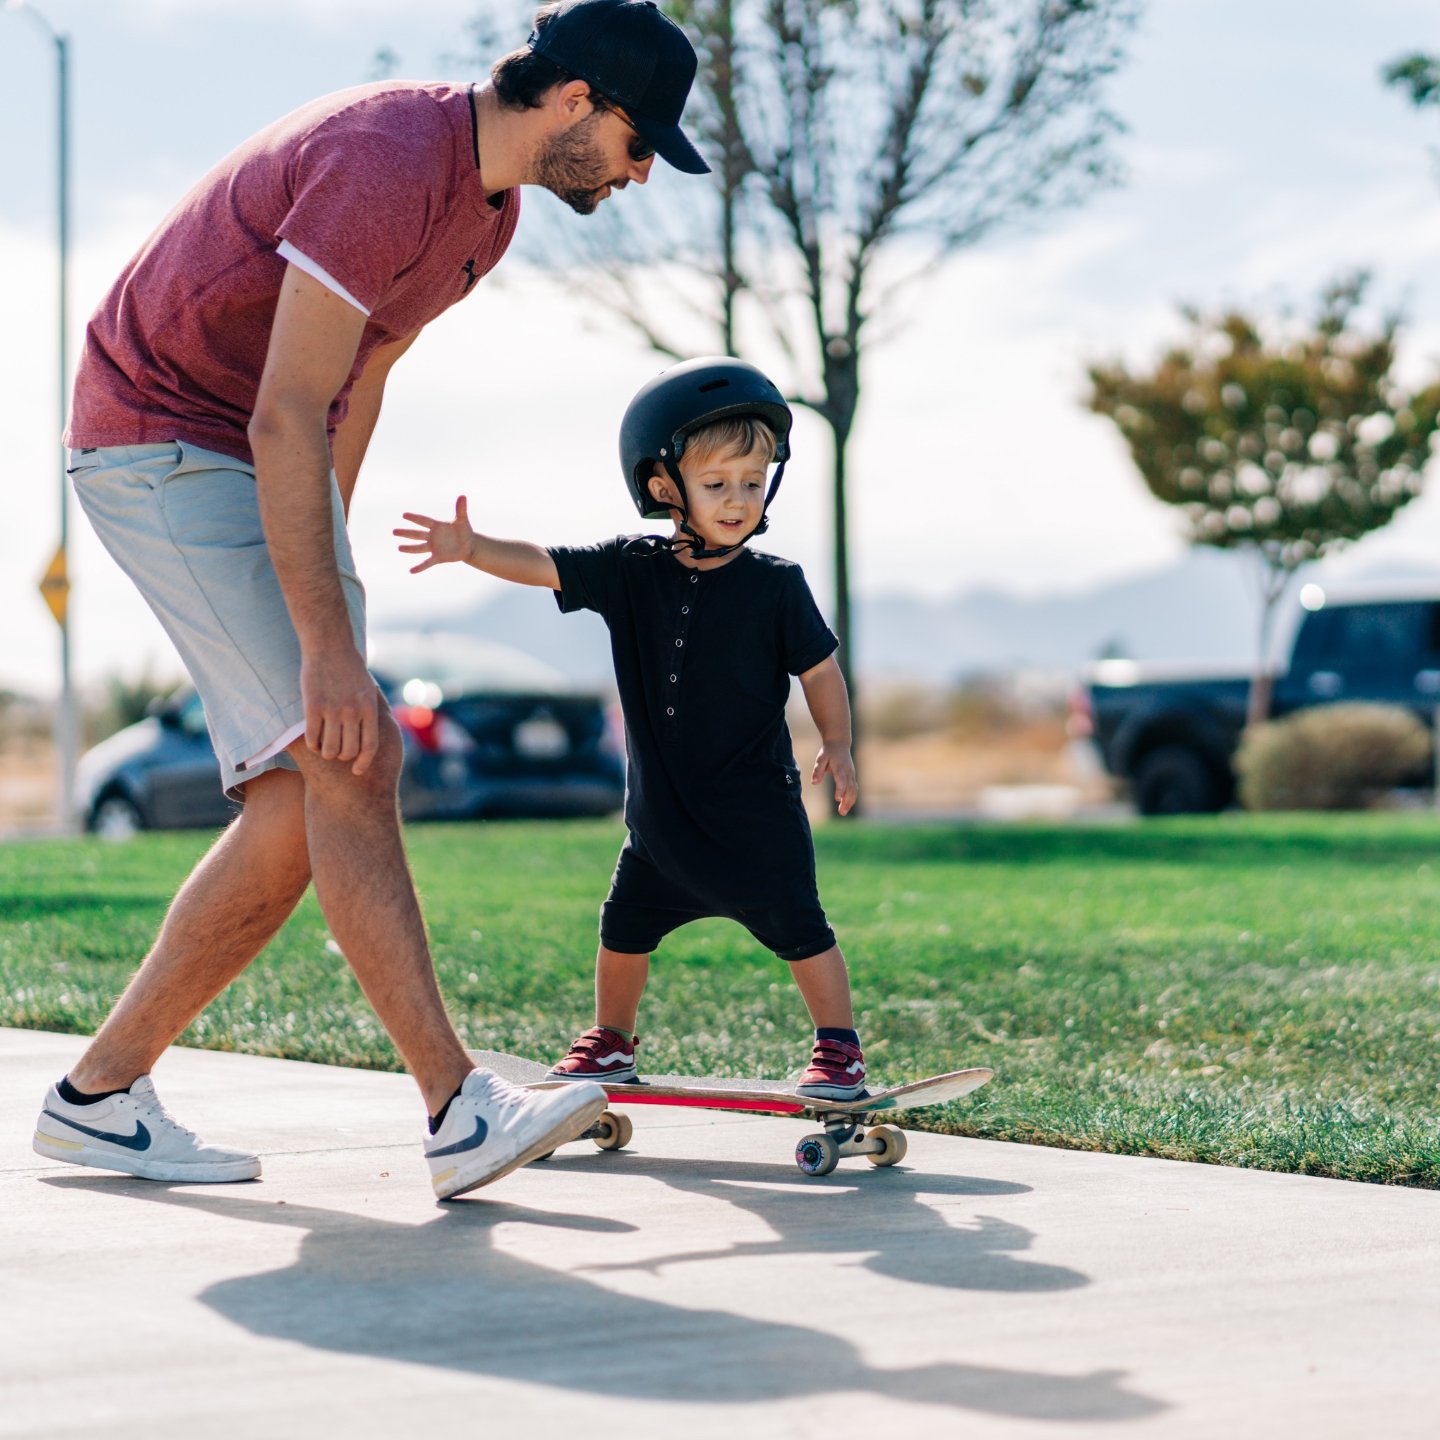 Throwback :) Kellen has grown a lot over the past couple years. But nothing has changed with Karl helping him try new things 🤍
:
#fatherandson #learntoskate